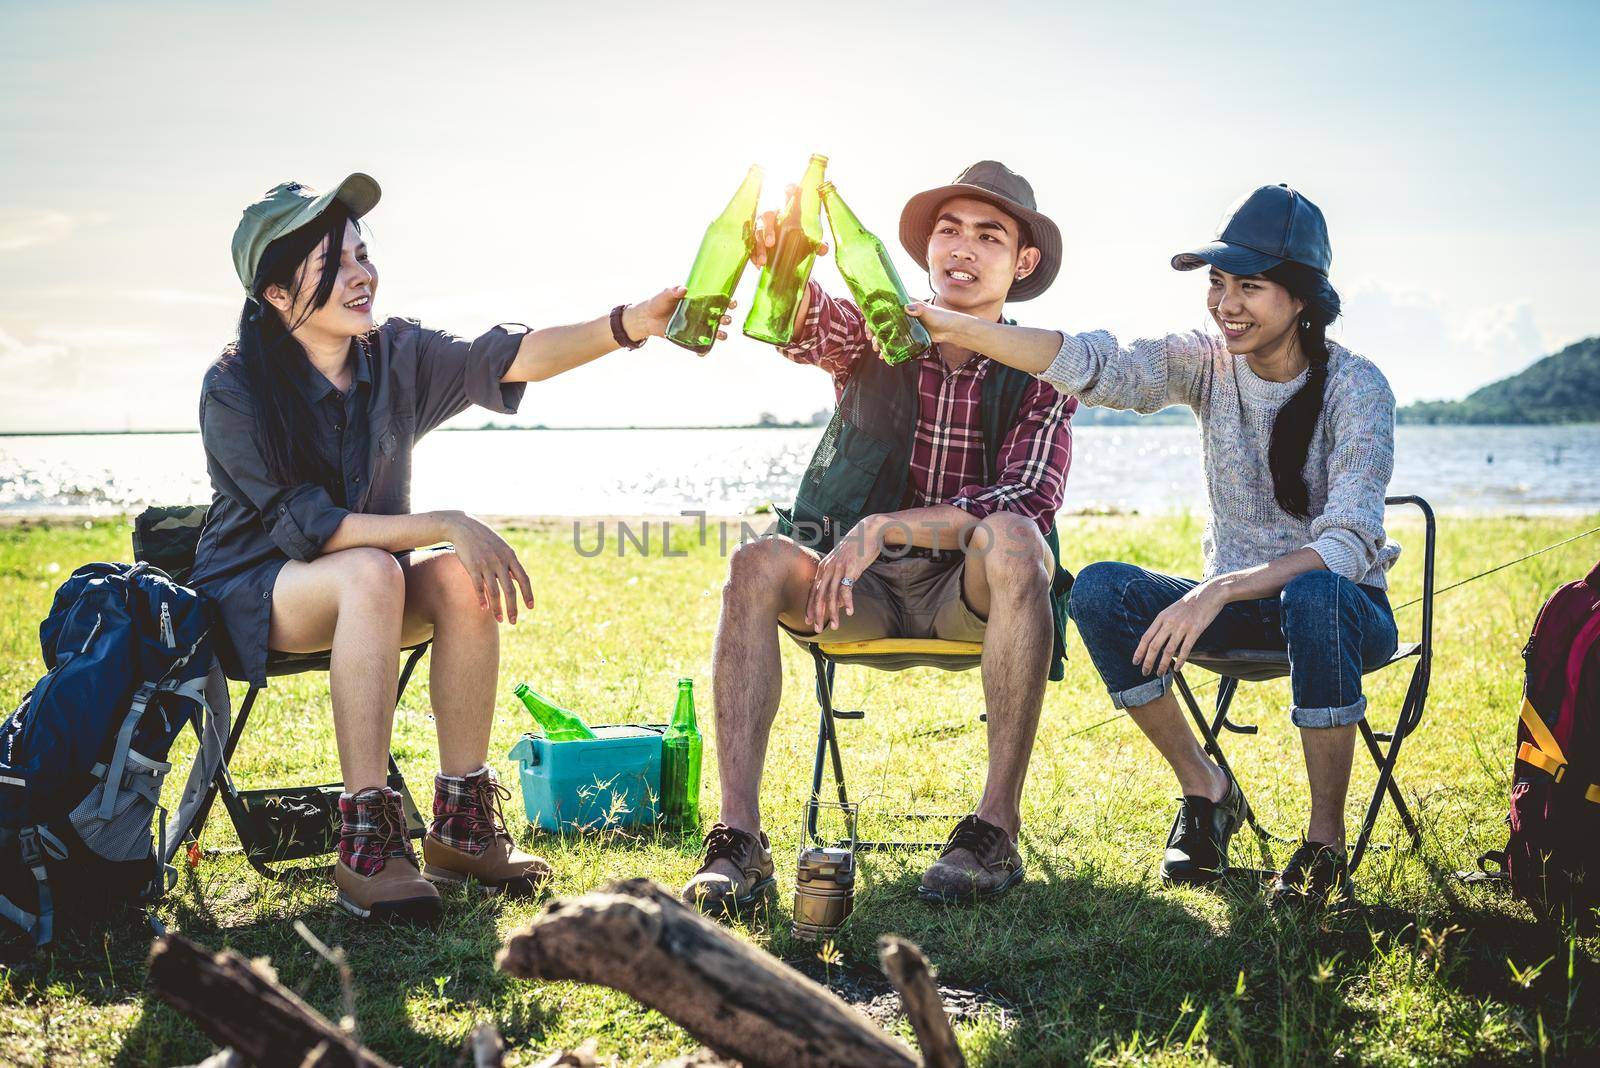 Group of young Asian friends enjoy picnic and party at lake with camping backpack and chair. Young people toasting and cheering bottles of beer. People and lifestyles concept. Outdoor background theme by MiniStocker